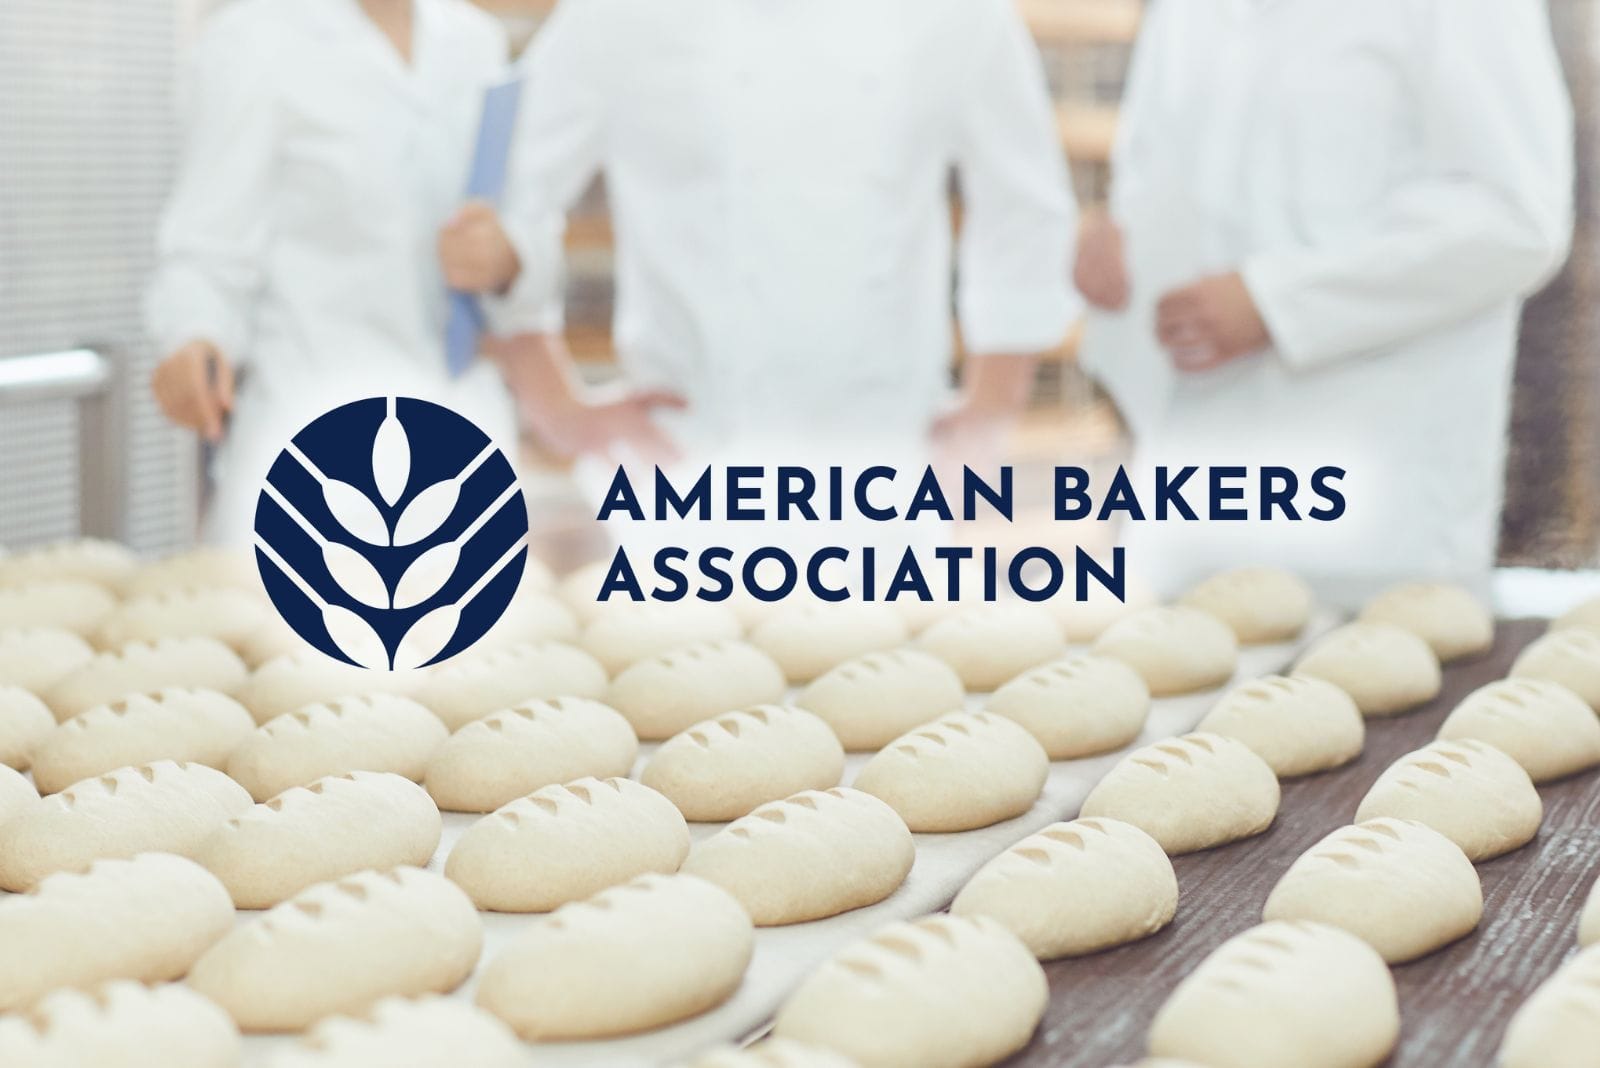 unbaked and scored bread loave with the word American Bakers Association